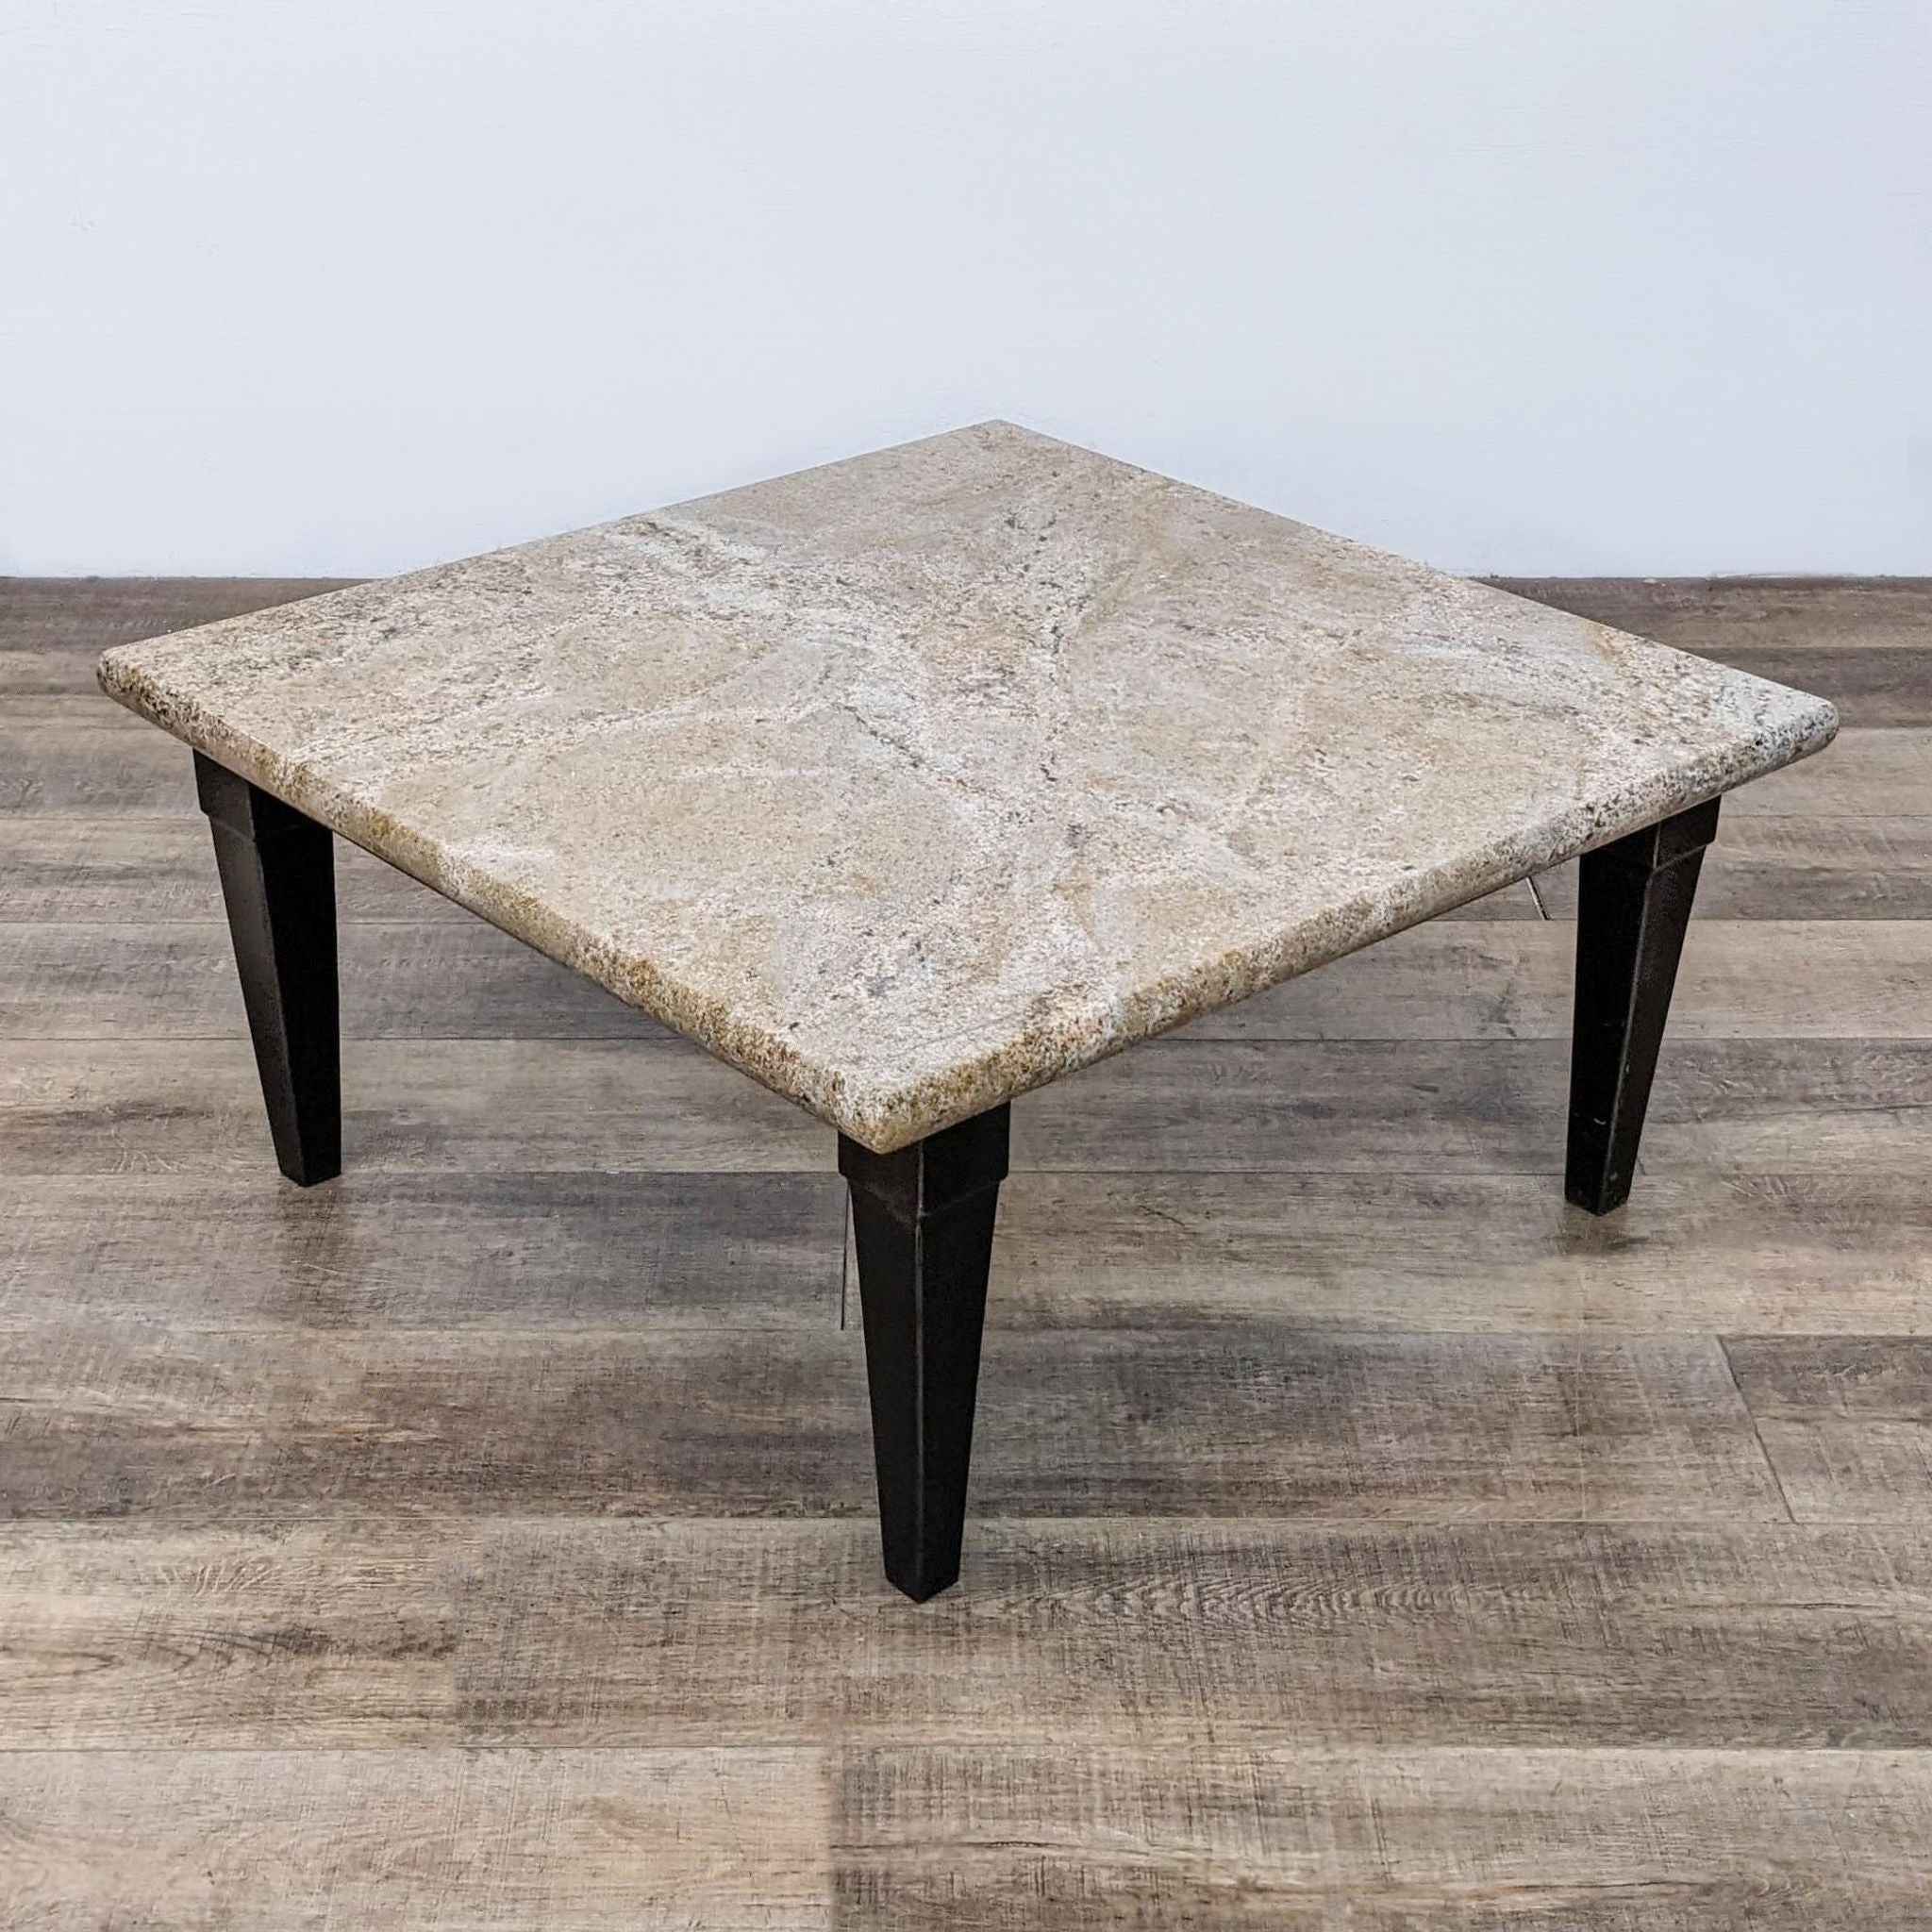 Square stone top coffee table by Reperch with a sturdy metal base, positioned on a wooden surface.